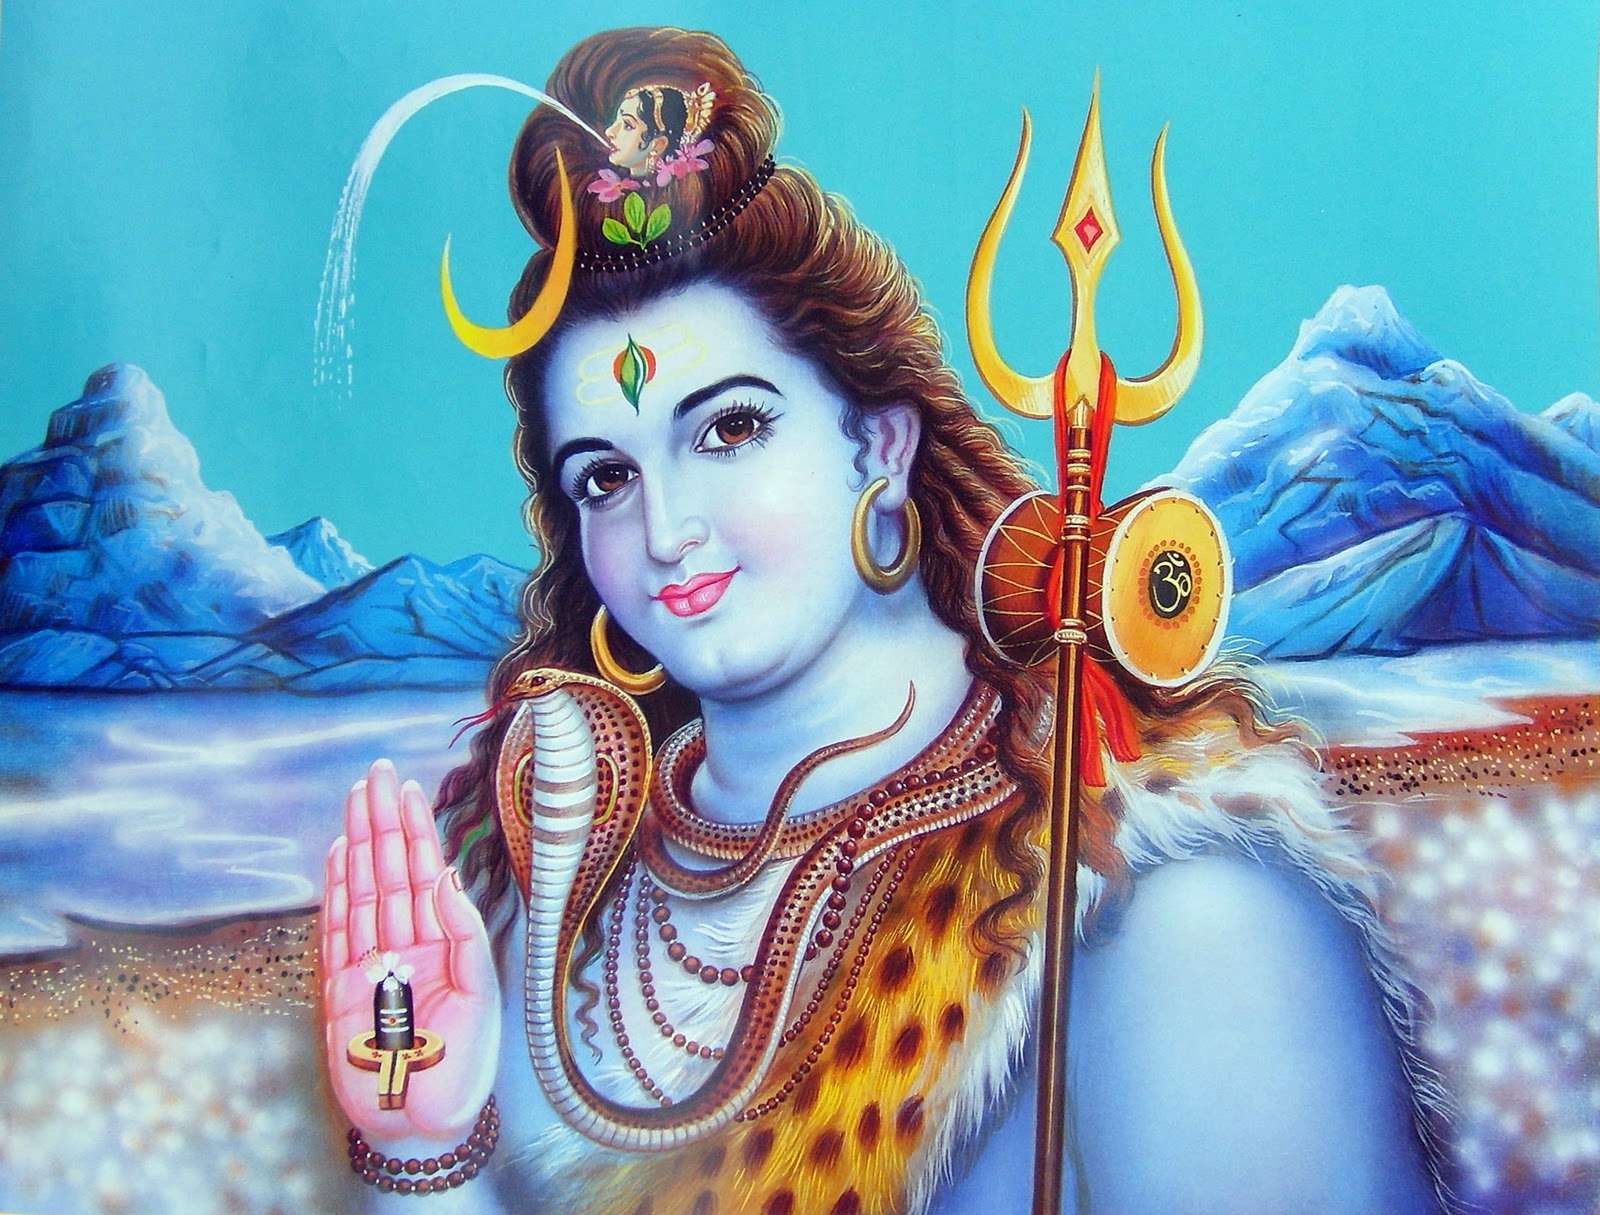 100+] Lord Shiva Mobile Wallpapers | Wallpapers.com